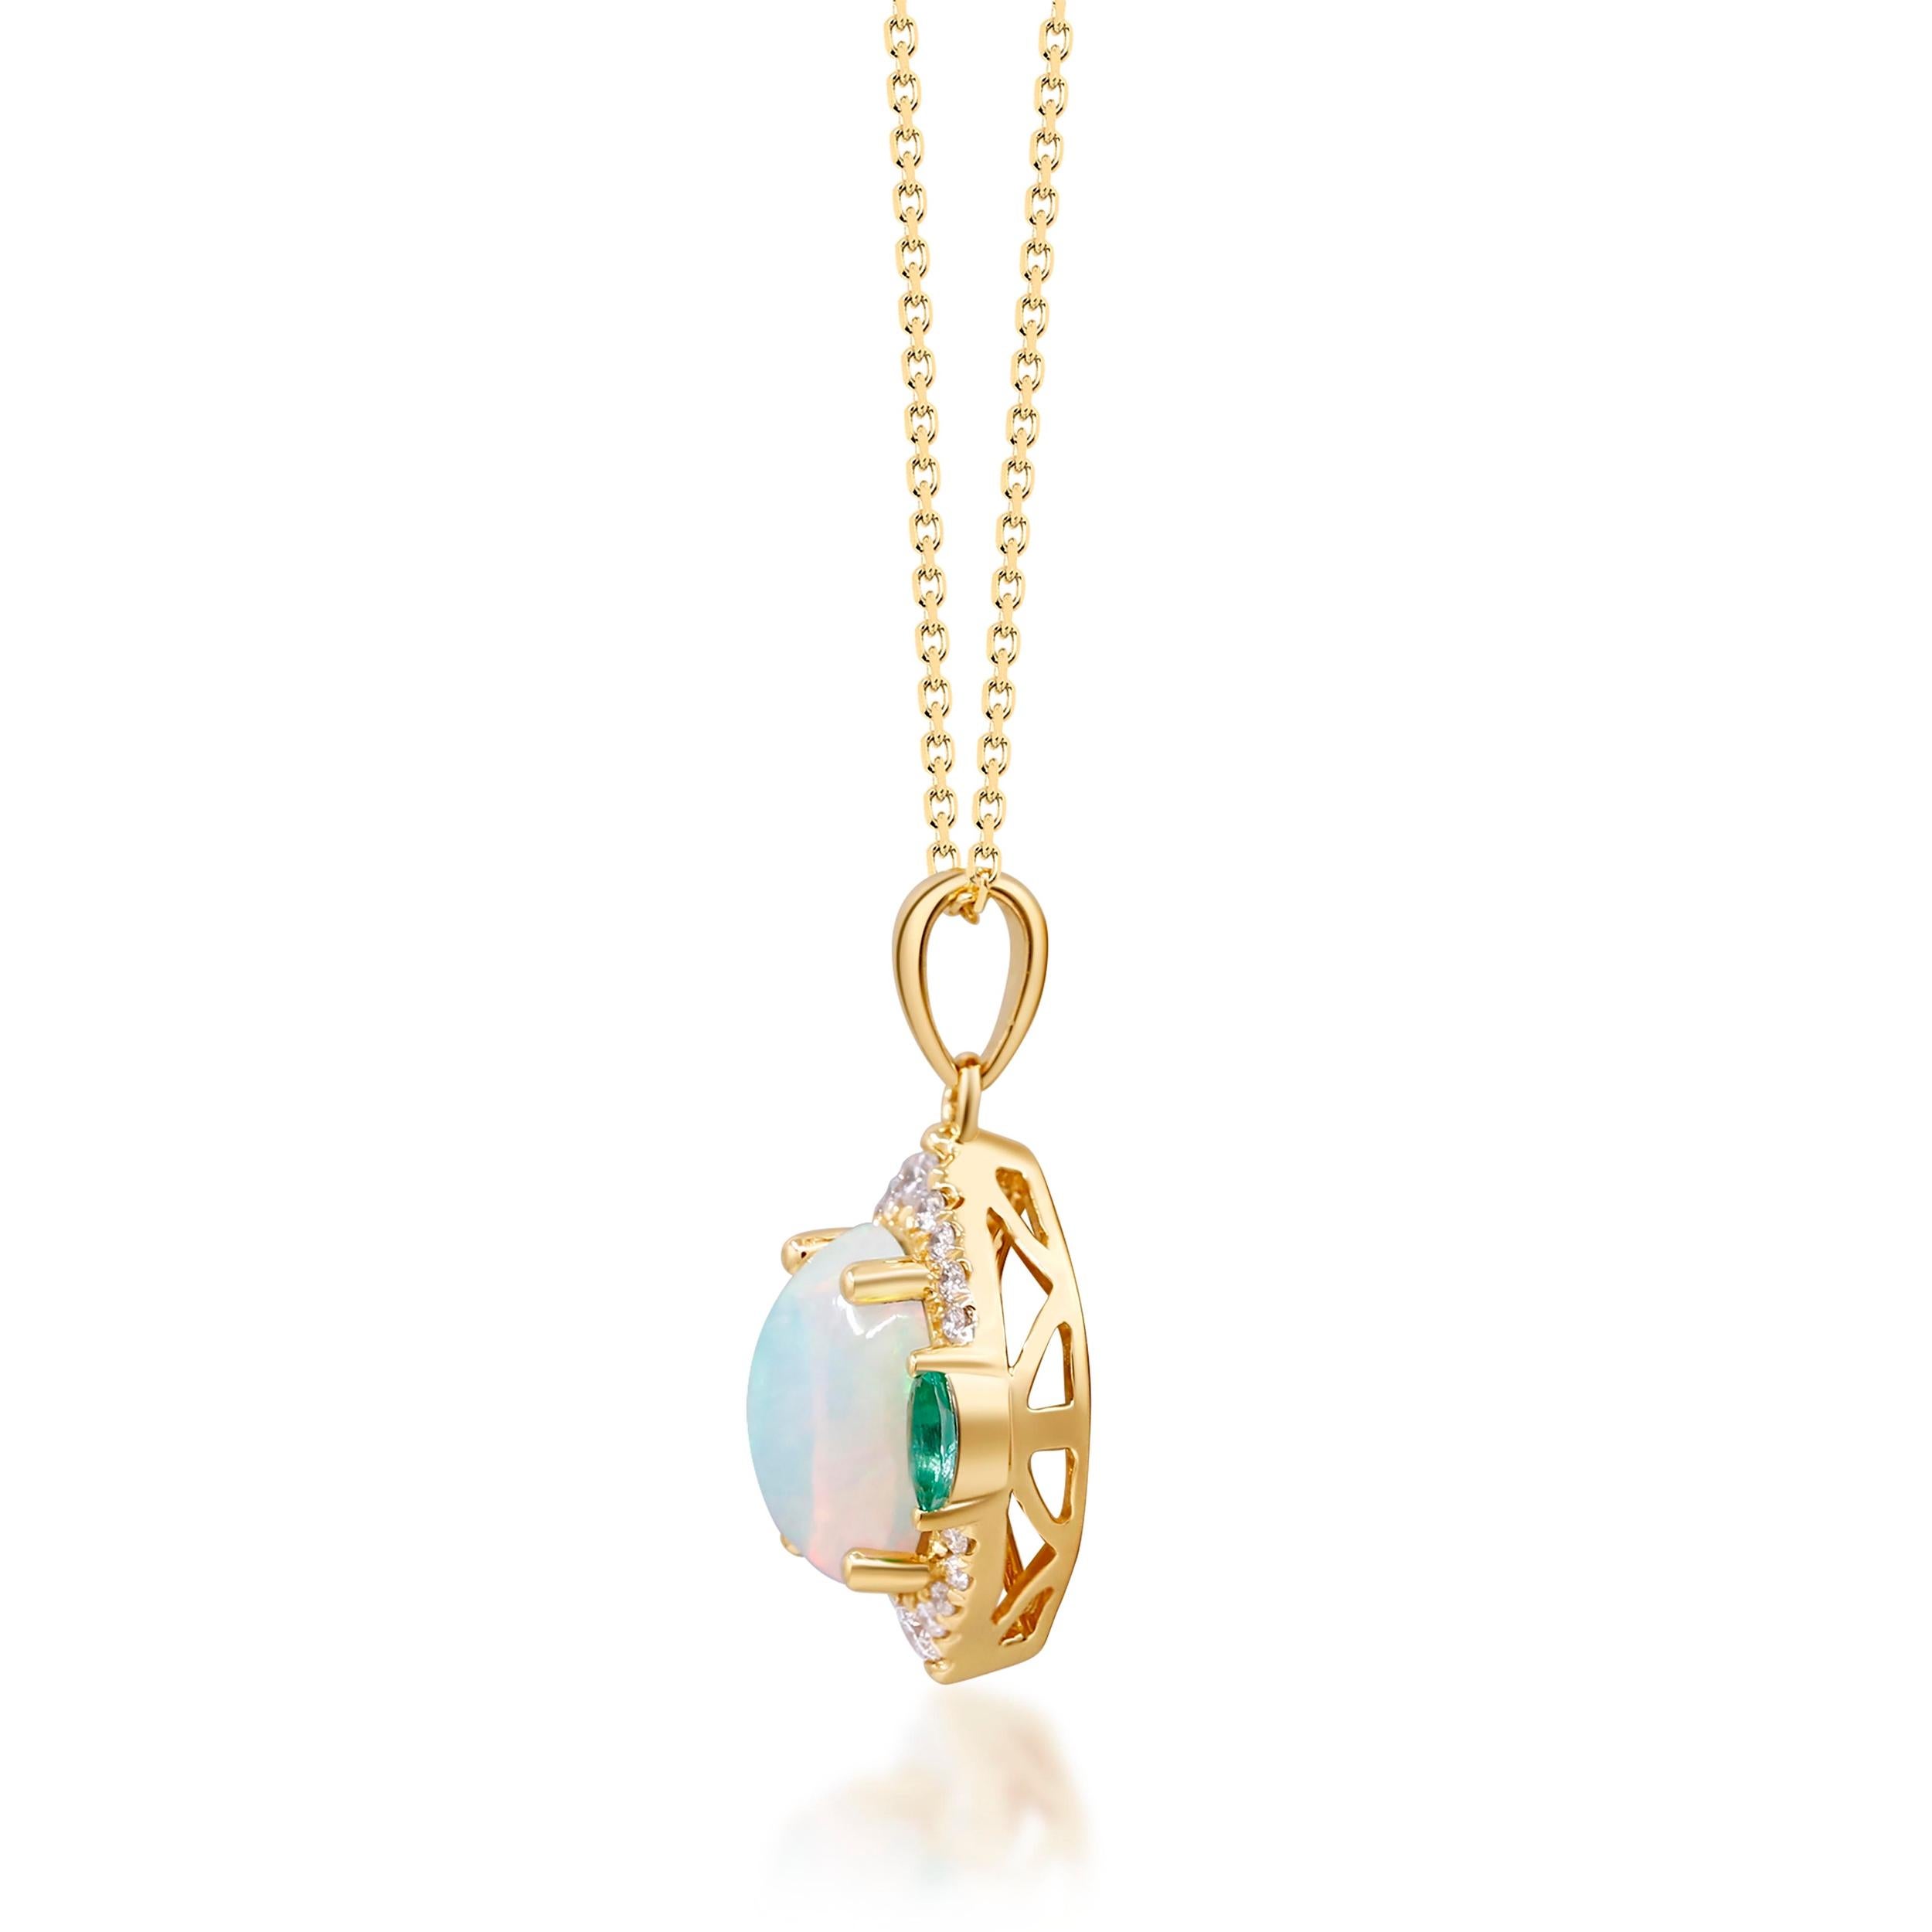 Decorate yourself in elegance with this Pendant is crafted from 10-karat Yellow Gold by Gin & Grace. This Pendant is made up of 8x10 Oval-Cab Ethiopian Opal (1 pcs) 1.87 carat, 2x4 mm Marquise-cut Emerald (2 pcs) 0.13 carat and Round-cut White